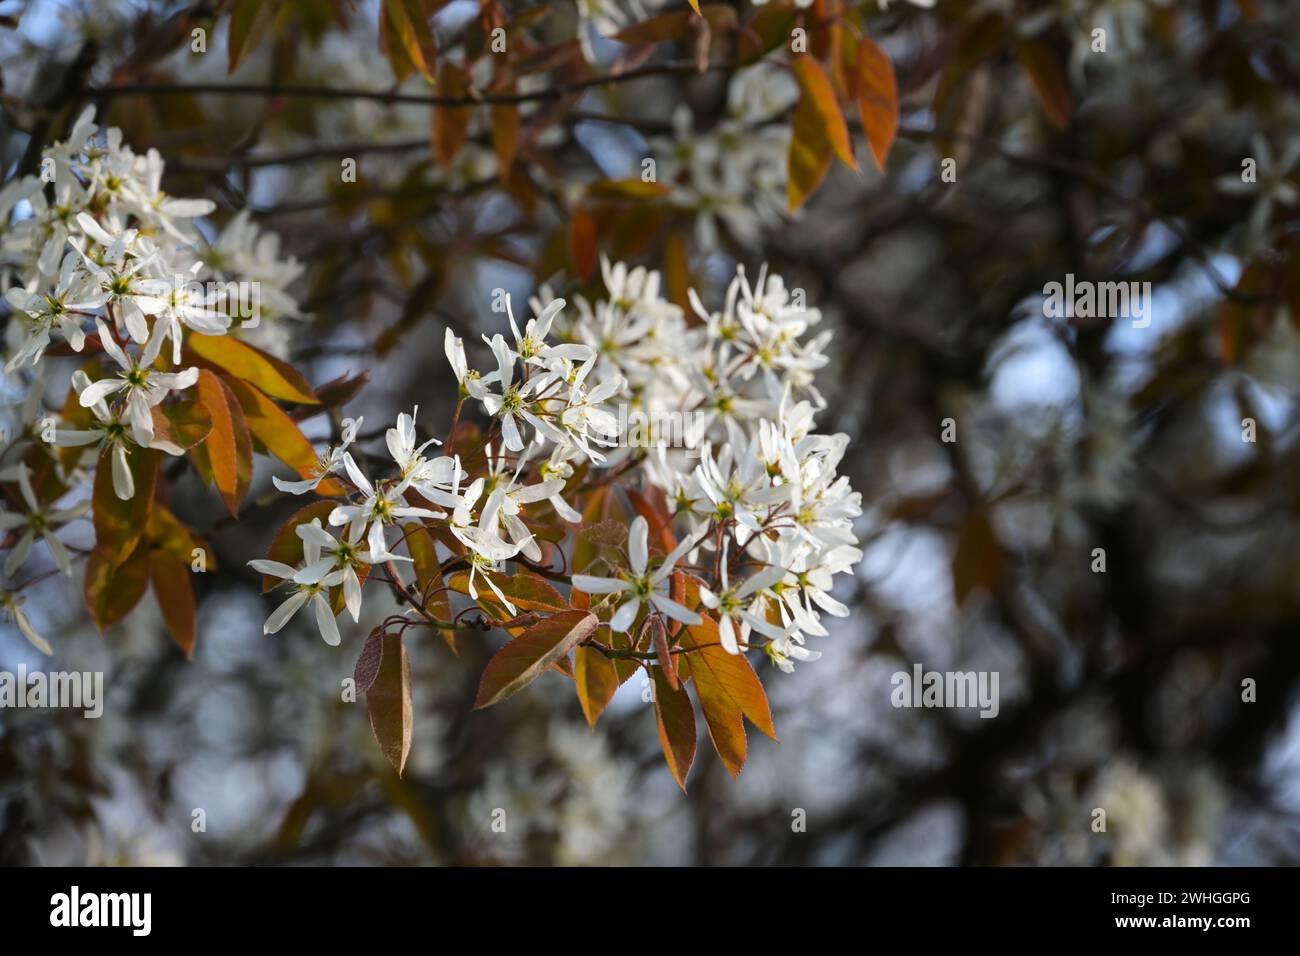 Amelanchier shrub with white flowers and copper colored foliage in spring, copy space, selected focus Stock Photo